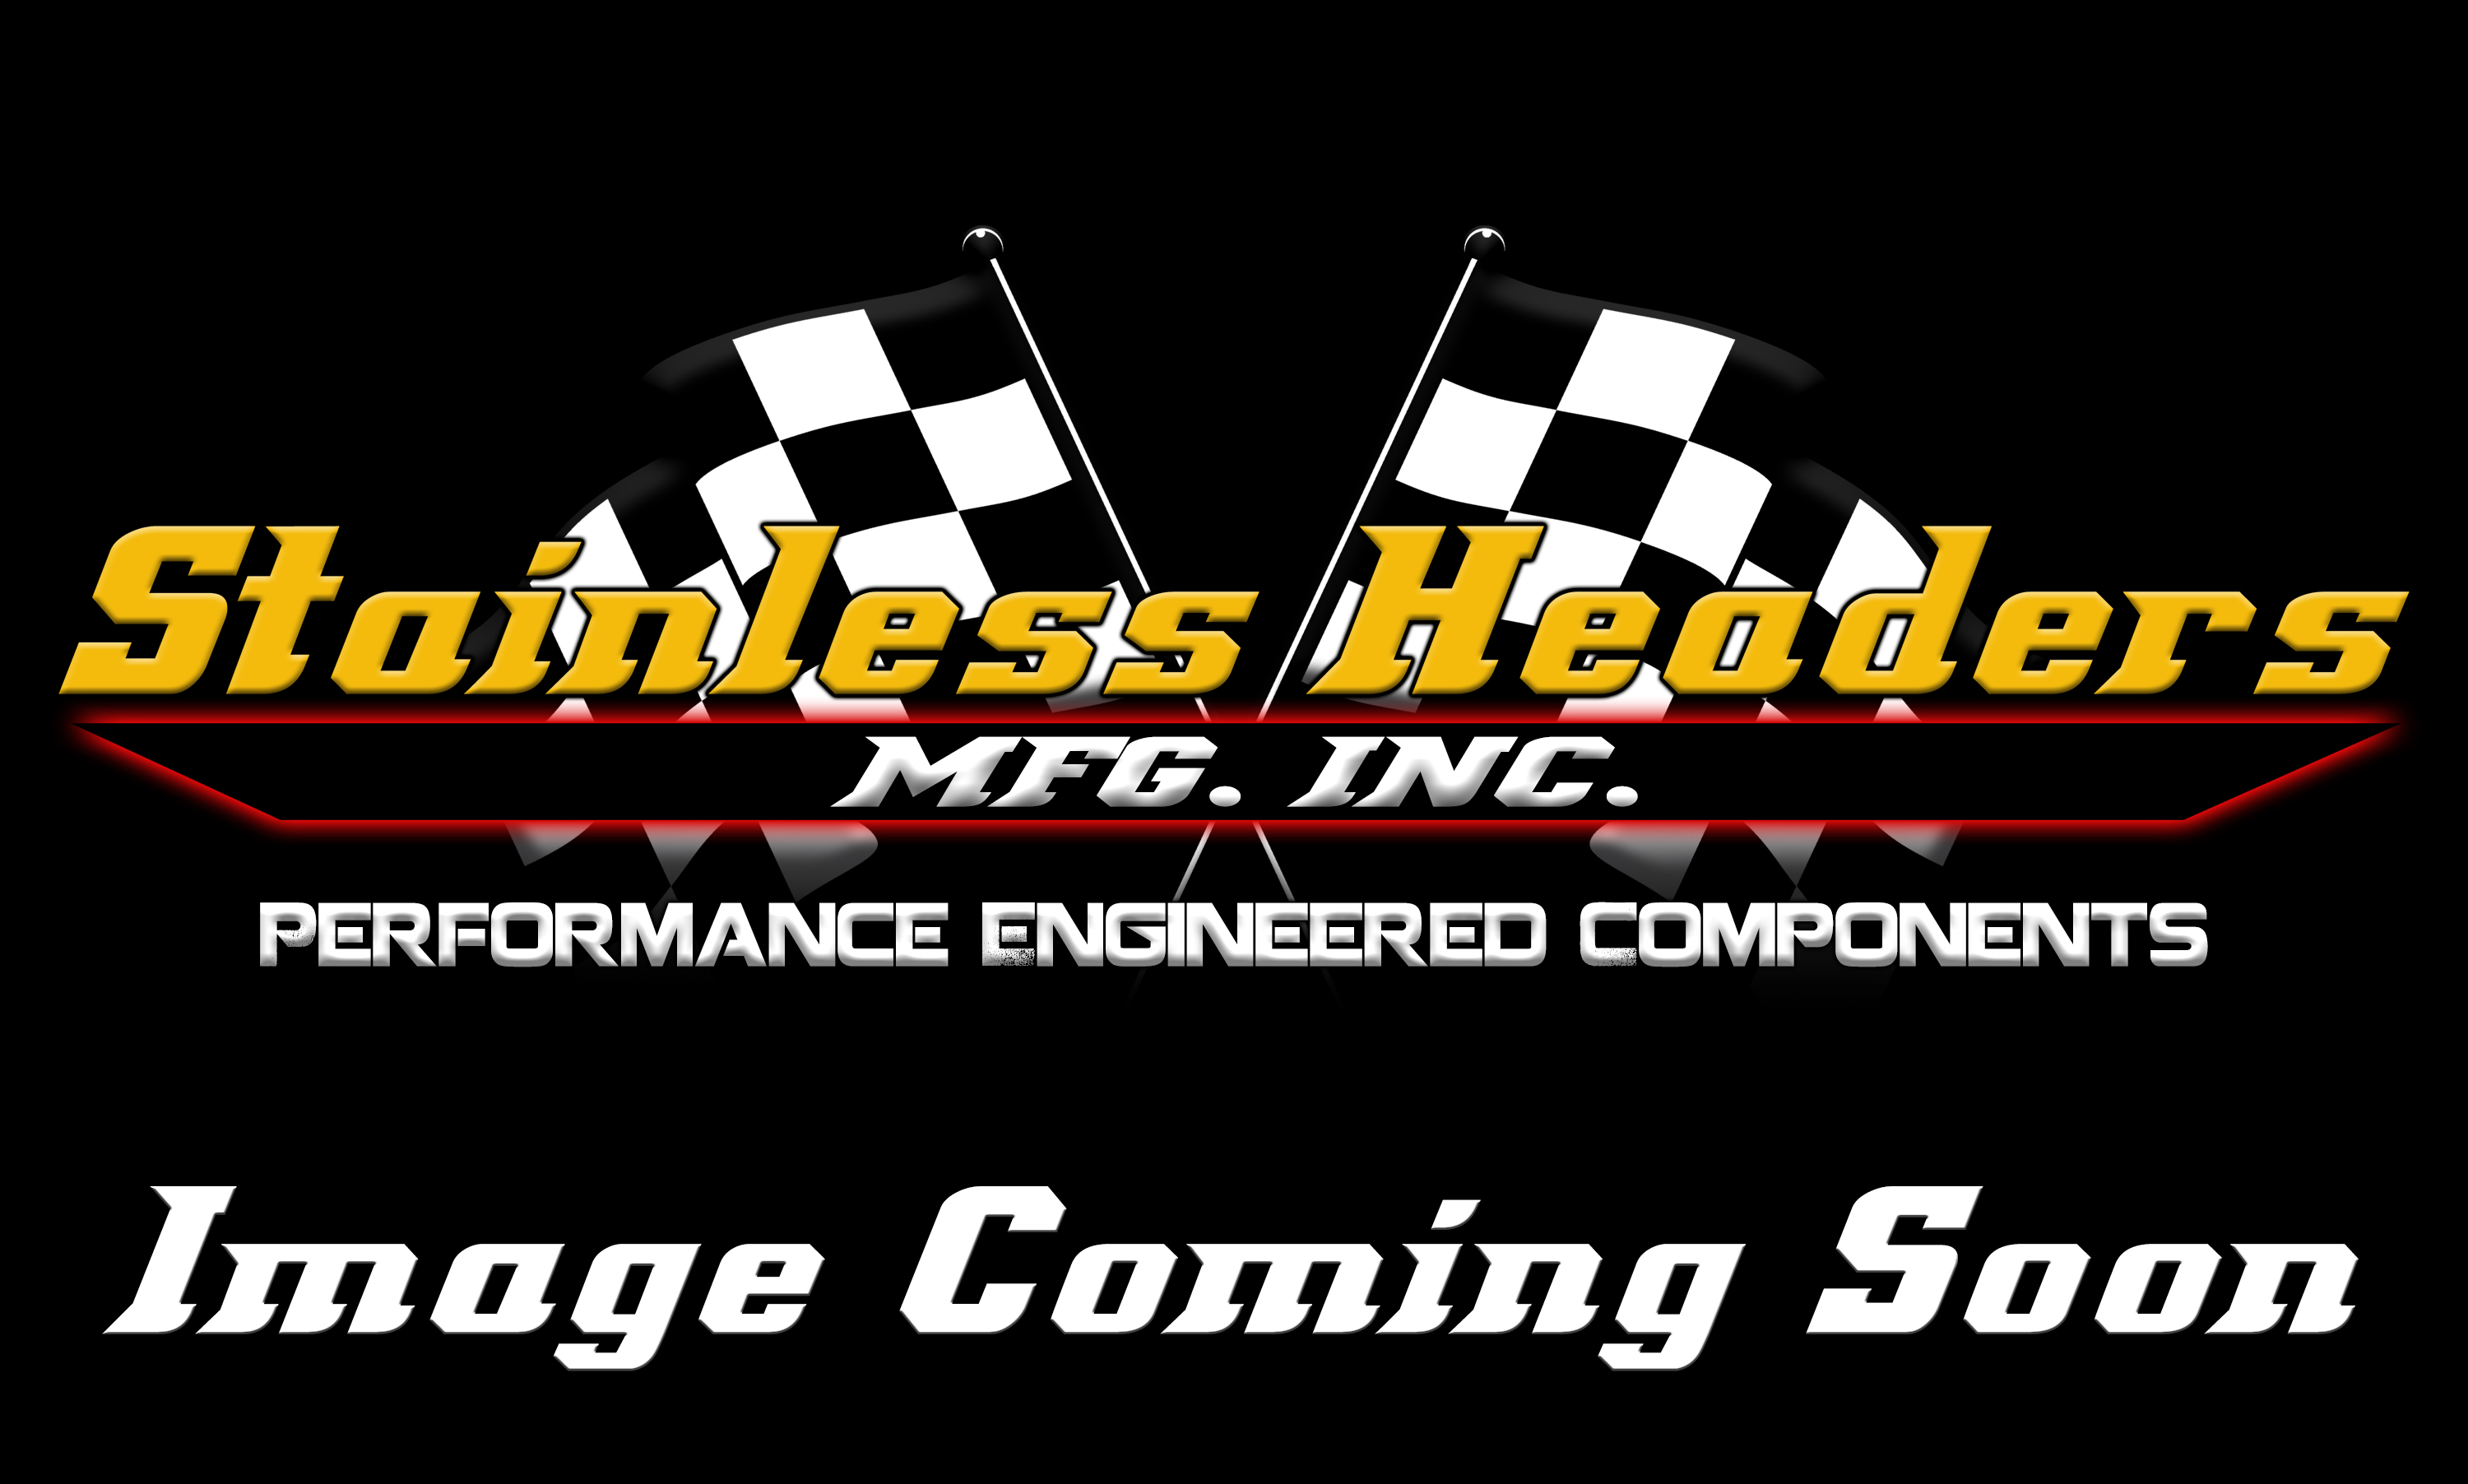 Stainless Headers - 2 3/8" Primary 2 into 1 Performance Merge Collector-16ga 304ss